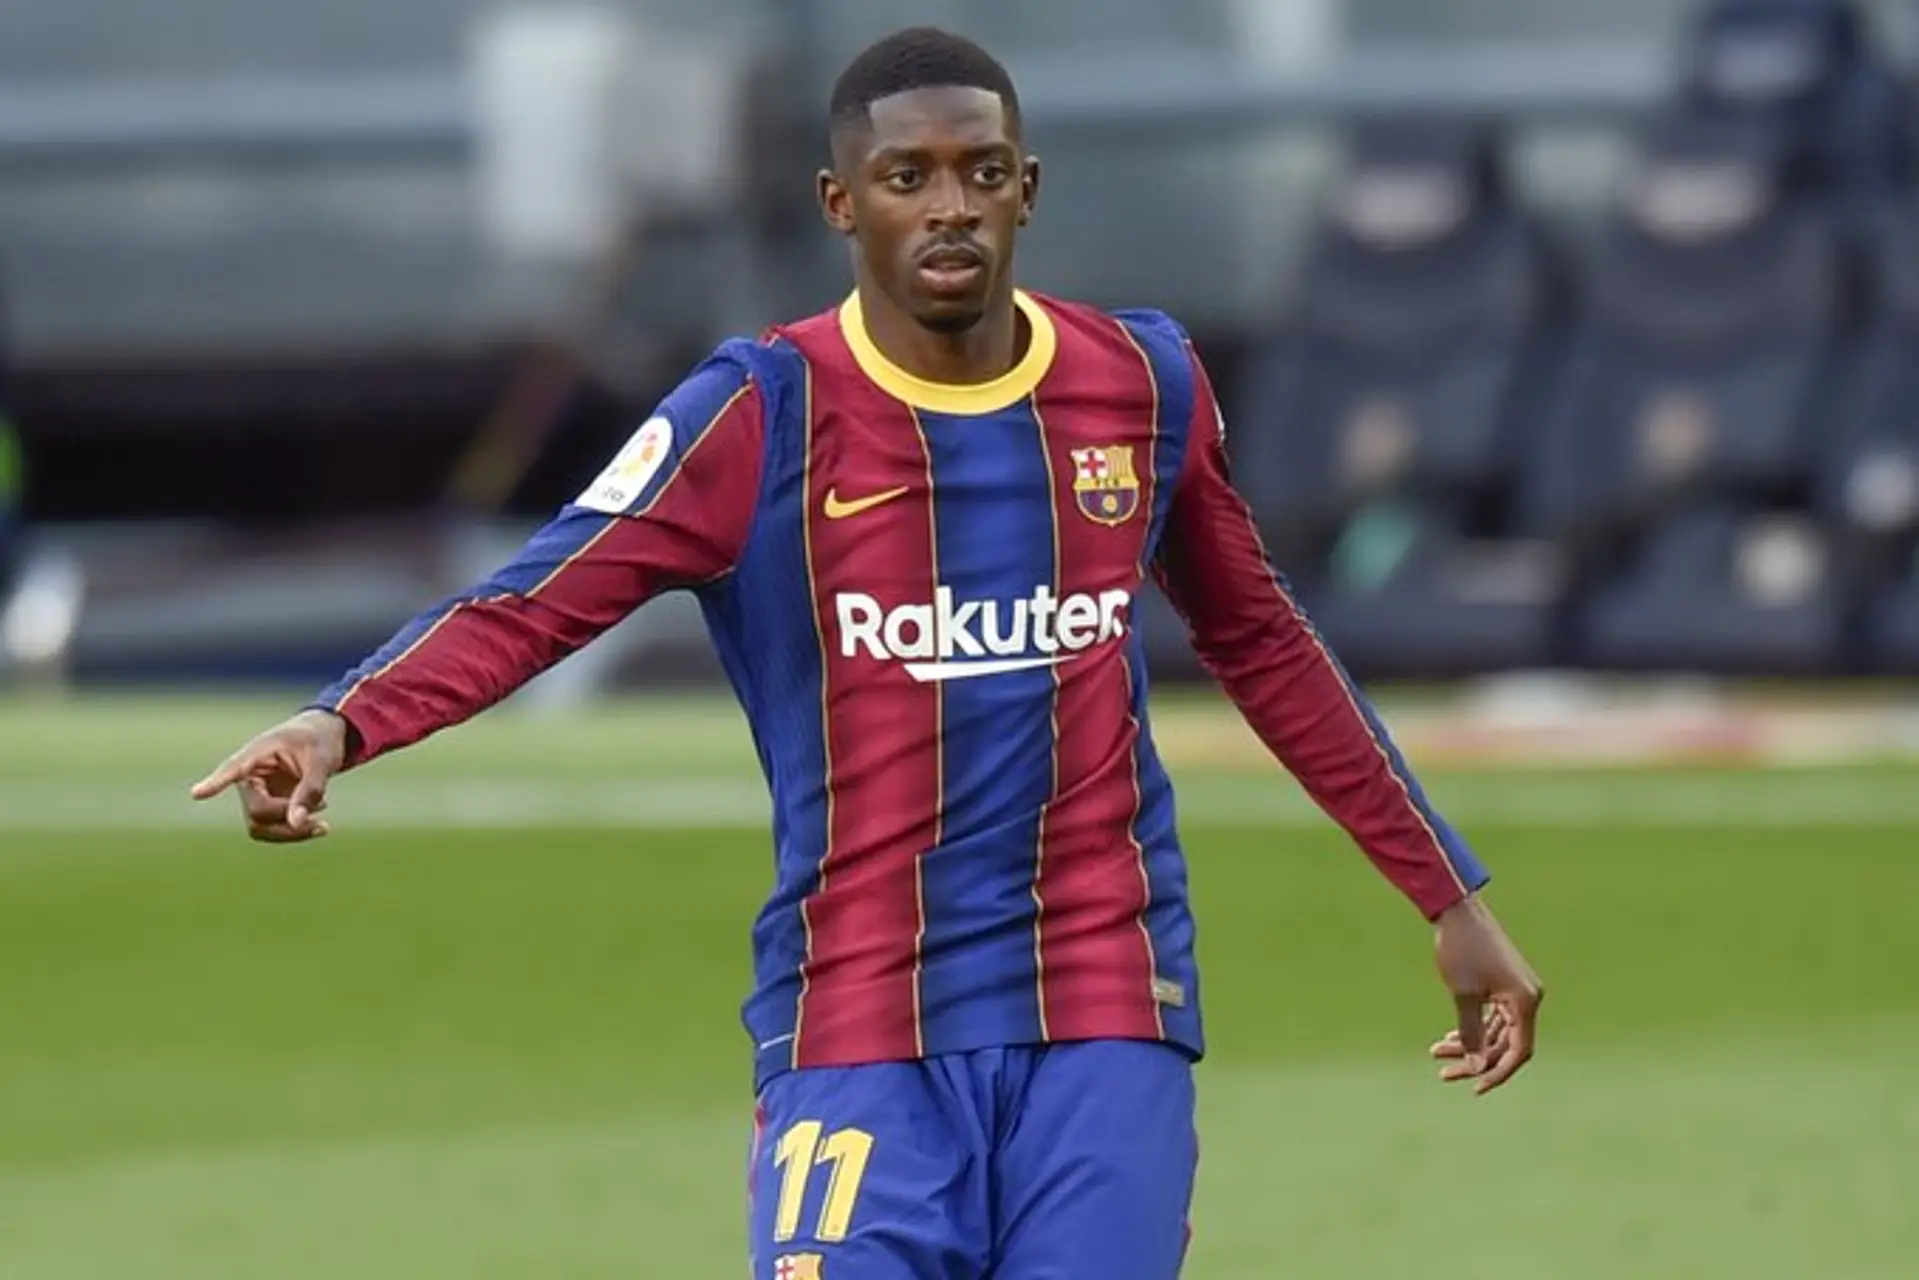 Why Dembele's contract extension is good for us